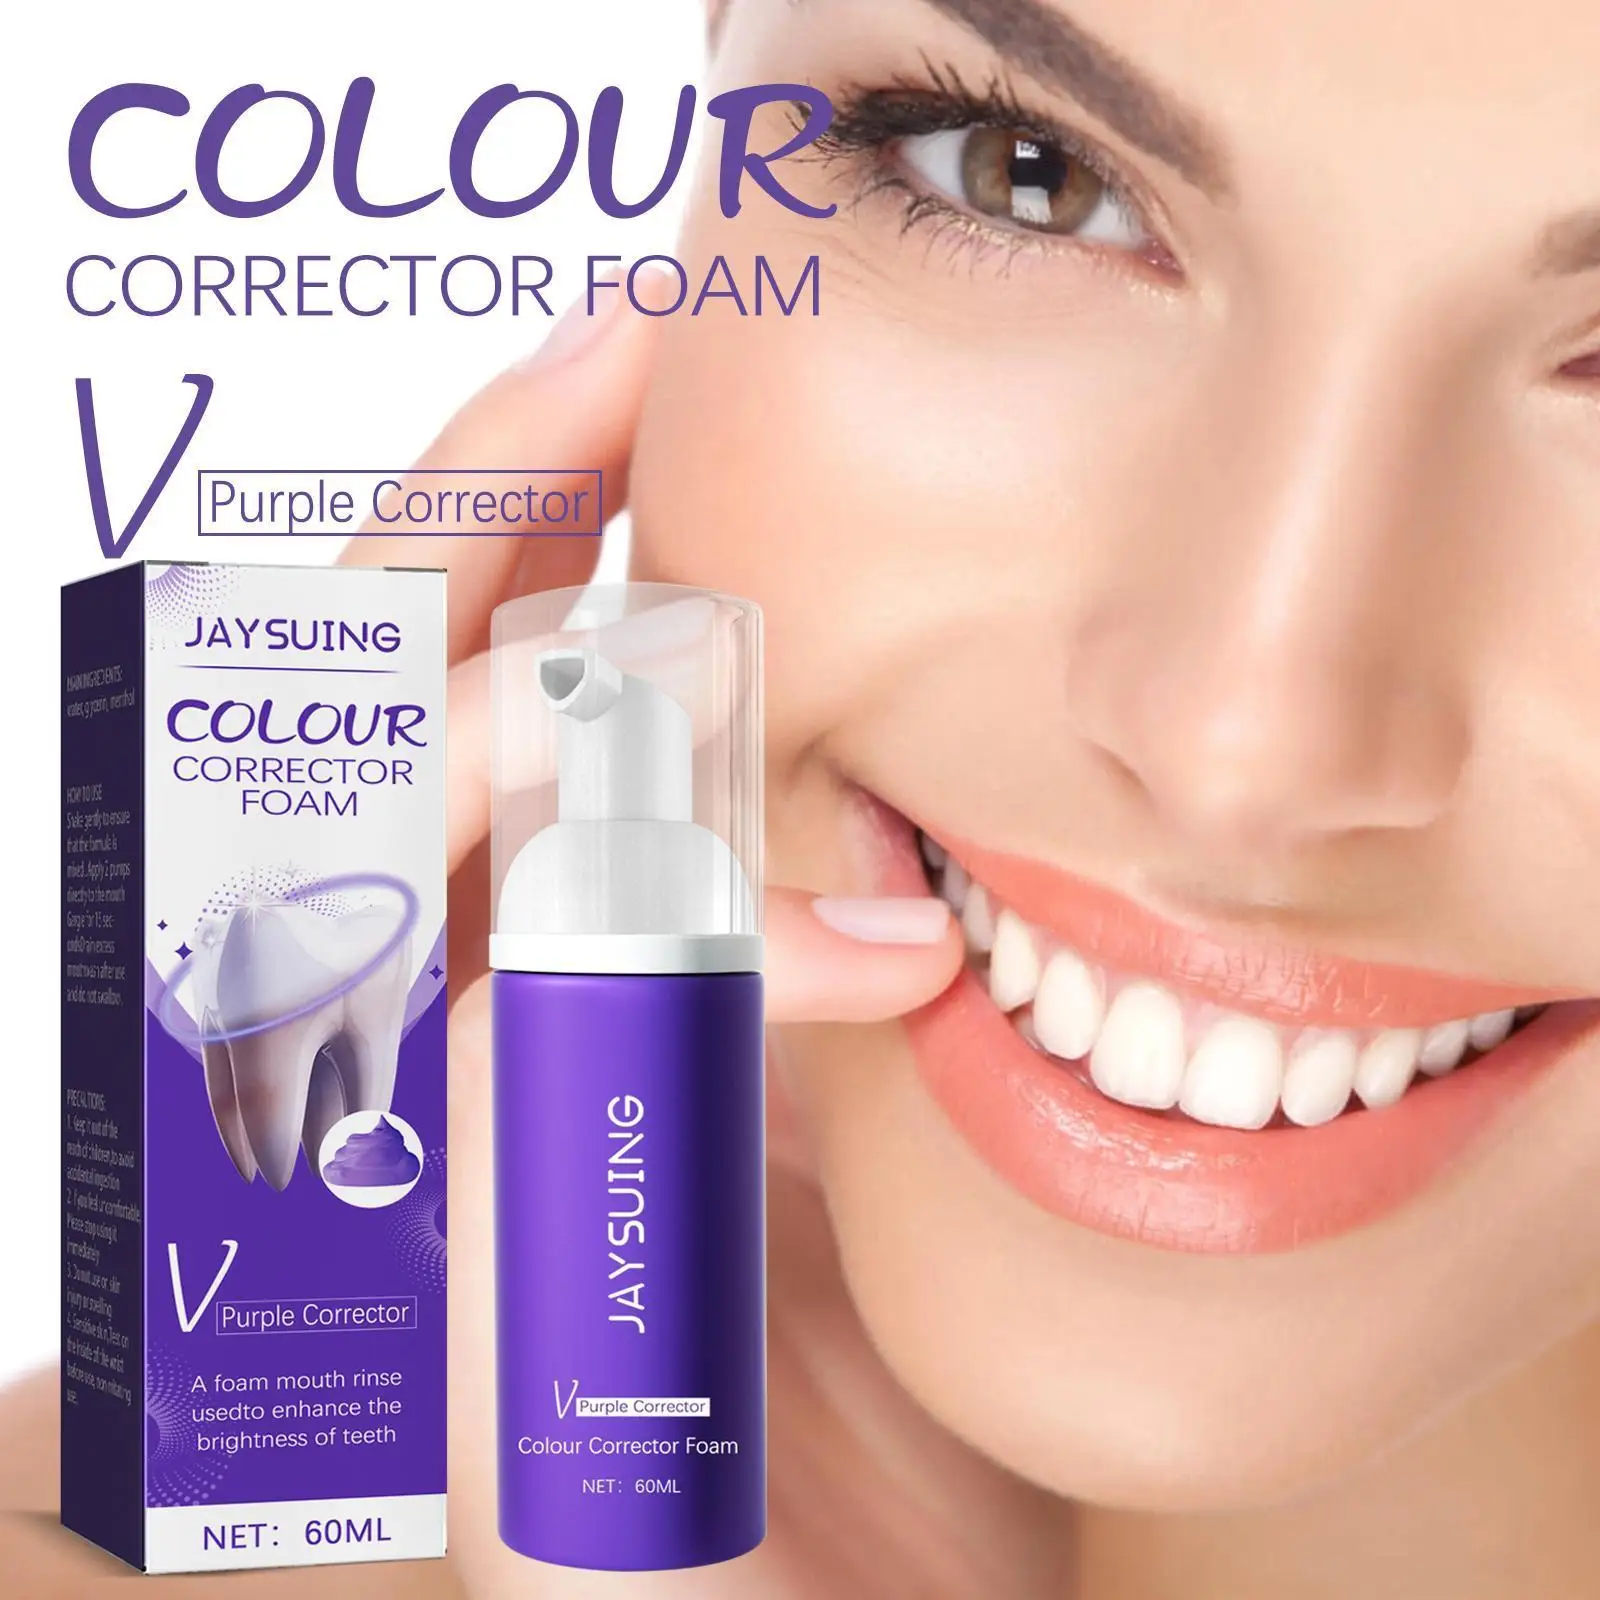 

60ml Mousse Foam Toothpaste Deep Cleansing Whitening Breath Care Remove Tooth Teeth Plaque Clean Stains Stains M4w5